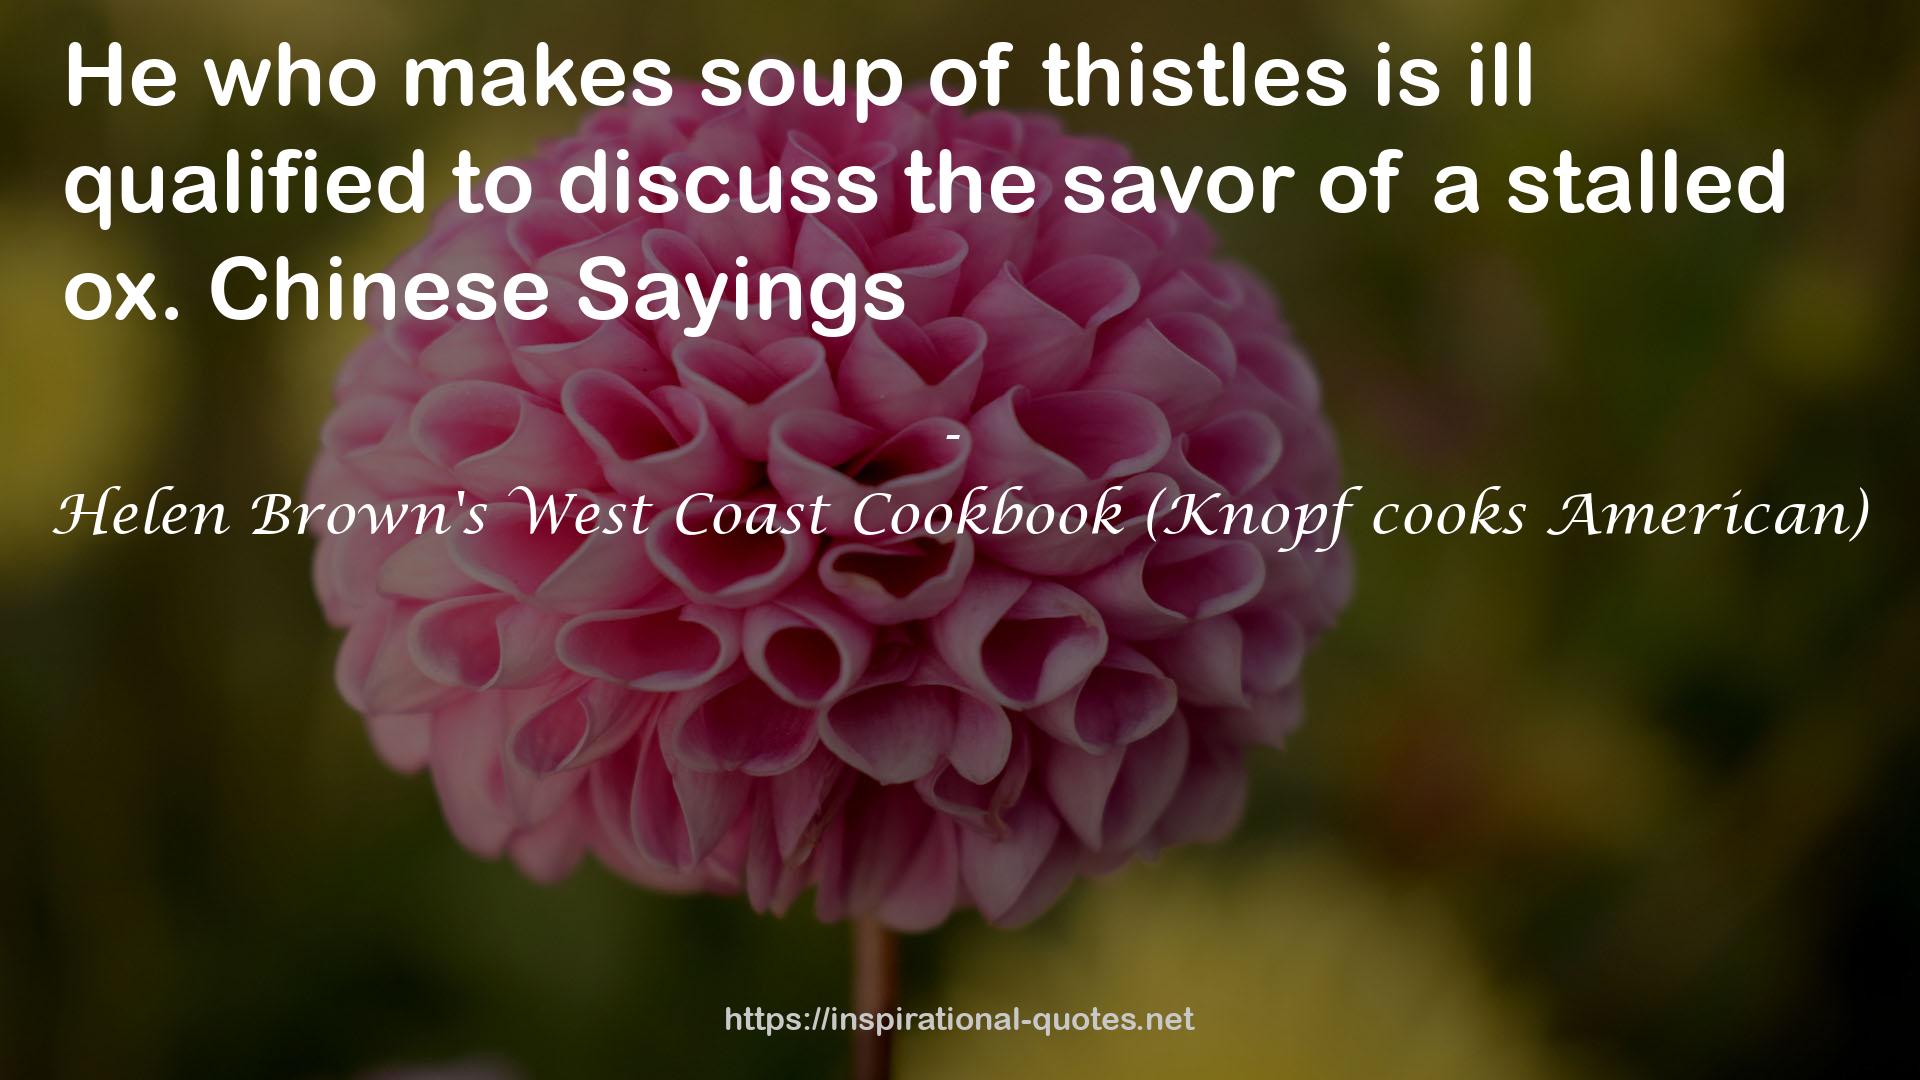 Helen Brown's West Coast Cookbook (Knopf cooks American) QUOTES